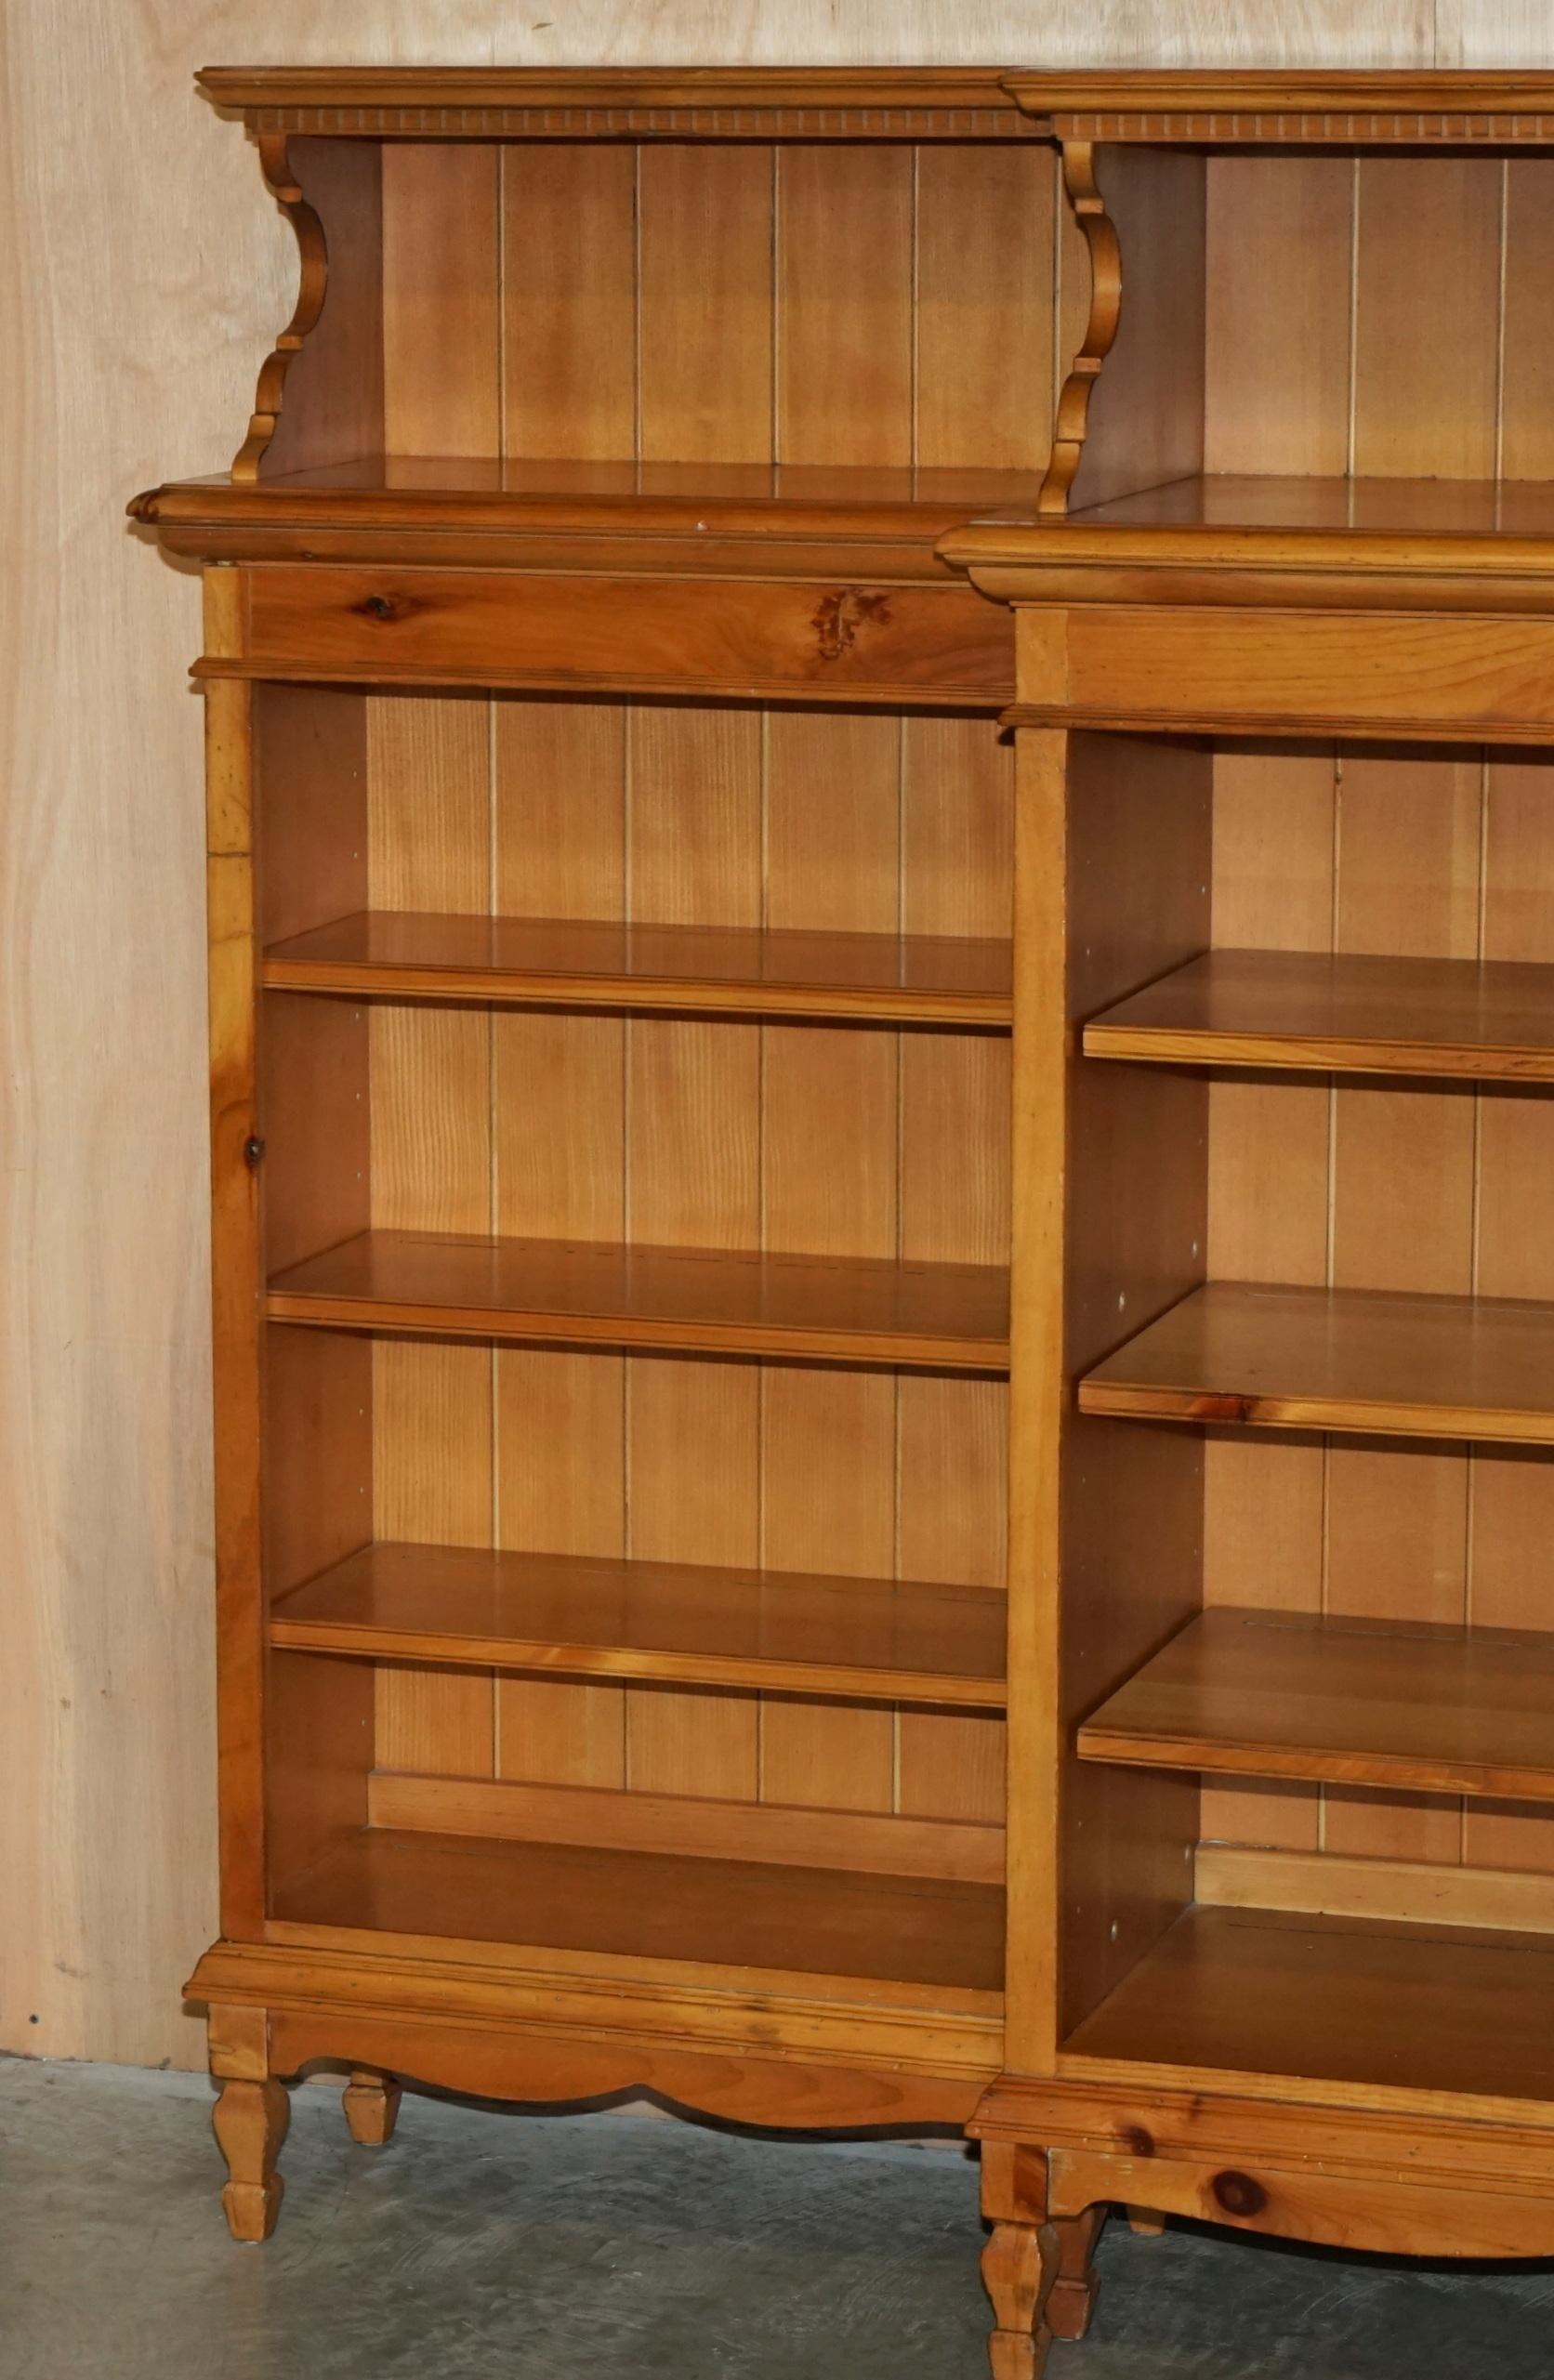 Hand-Crafted EXTRA LARGE RALPH LAUREN 1.7 METER TALL 2.4 METER WiDE OPEN OAK LIBRARY BOOKCASE For Sale